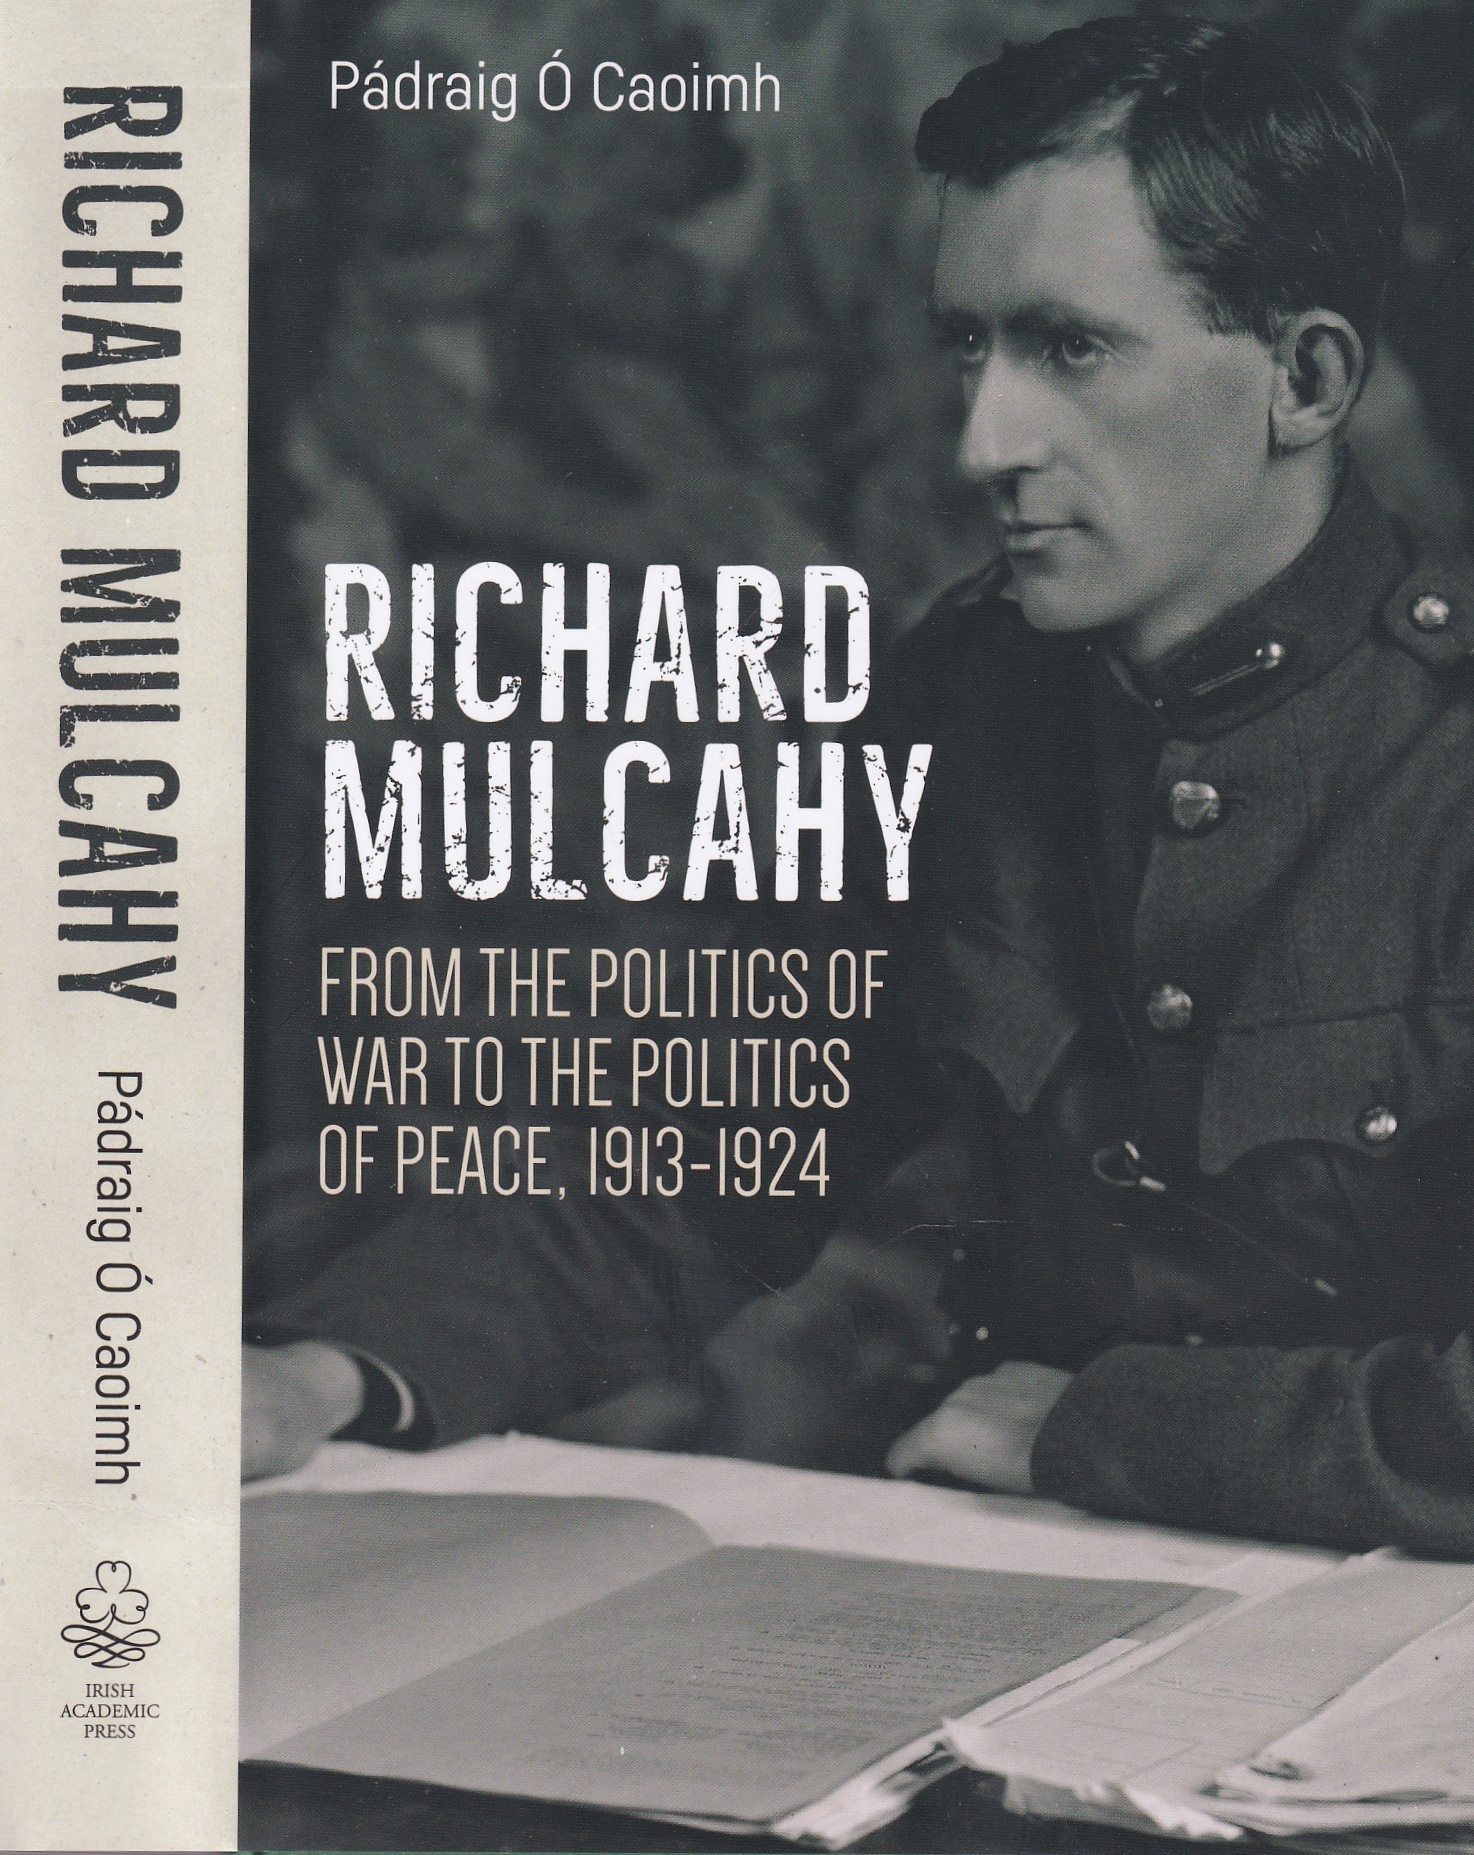 Richard Mulcahy: From the Politics of War to the Politics of Peace 1913-1924 by Padraig Ó Caoimh